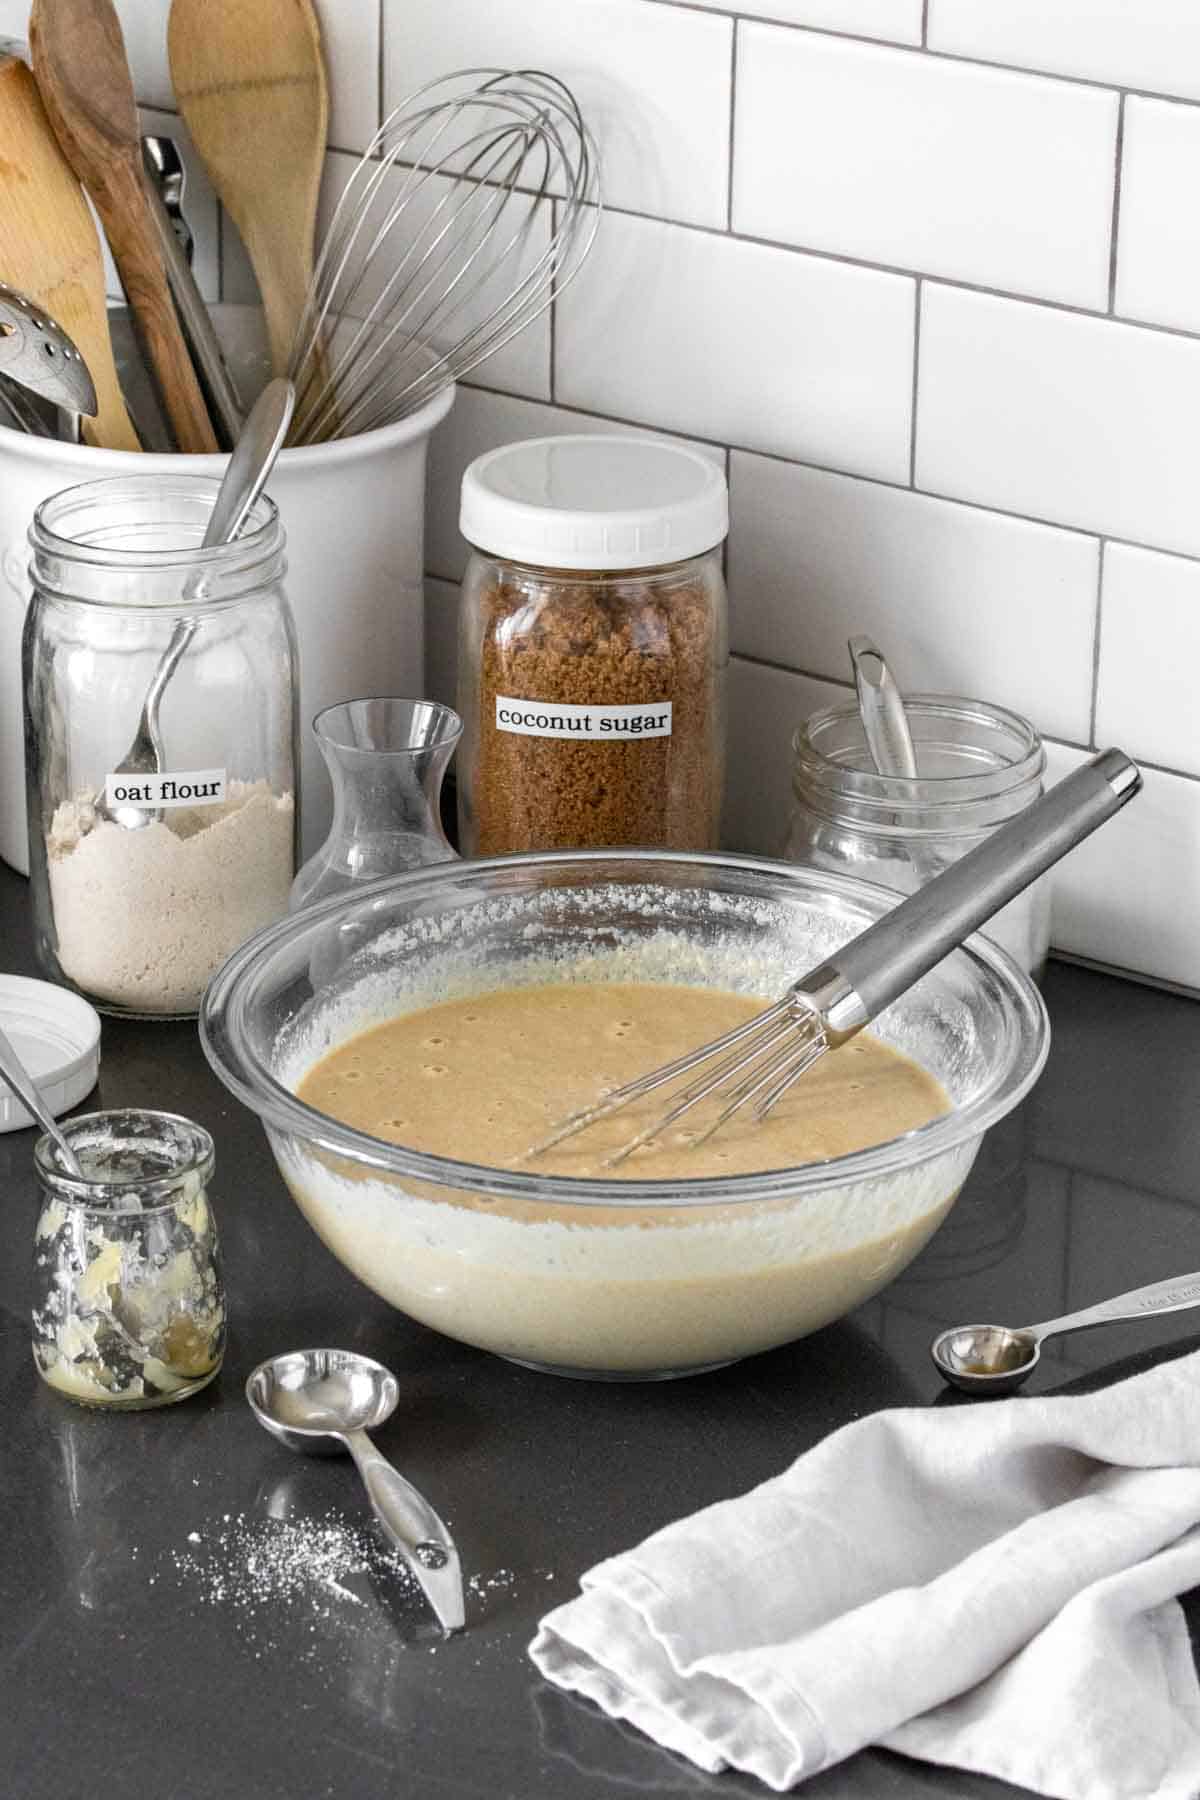 A glass bowl with light tan batter and a whisk in it on a grey kitchen countertop surrounded by jars of sugar.